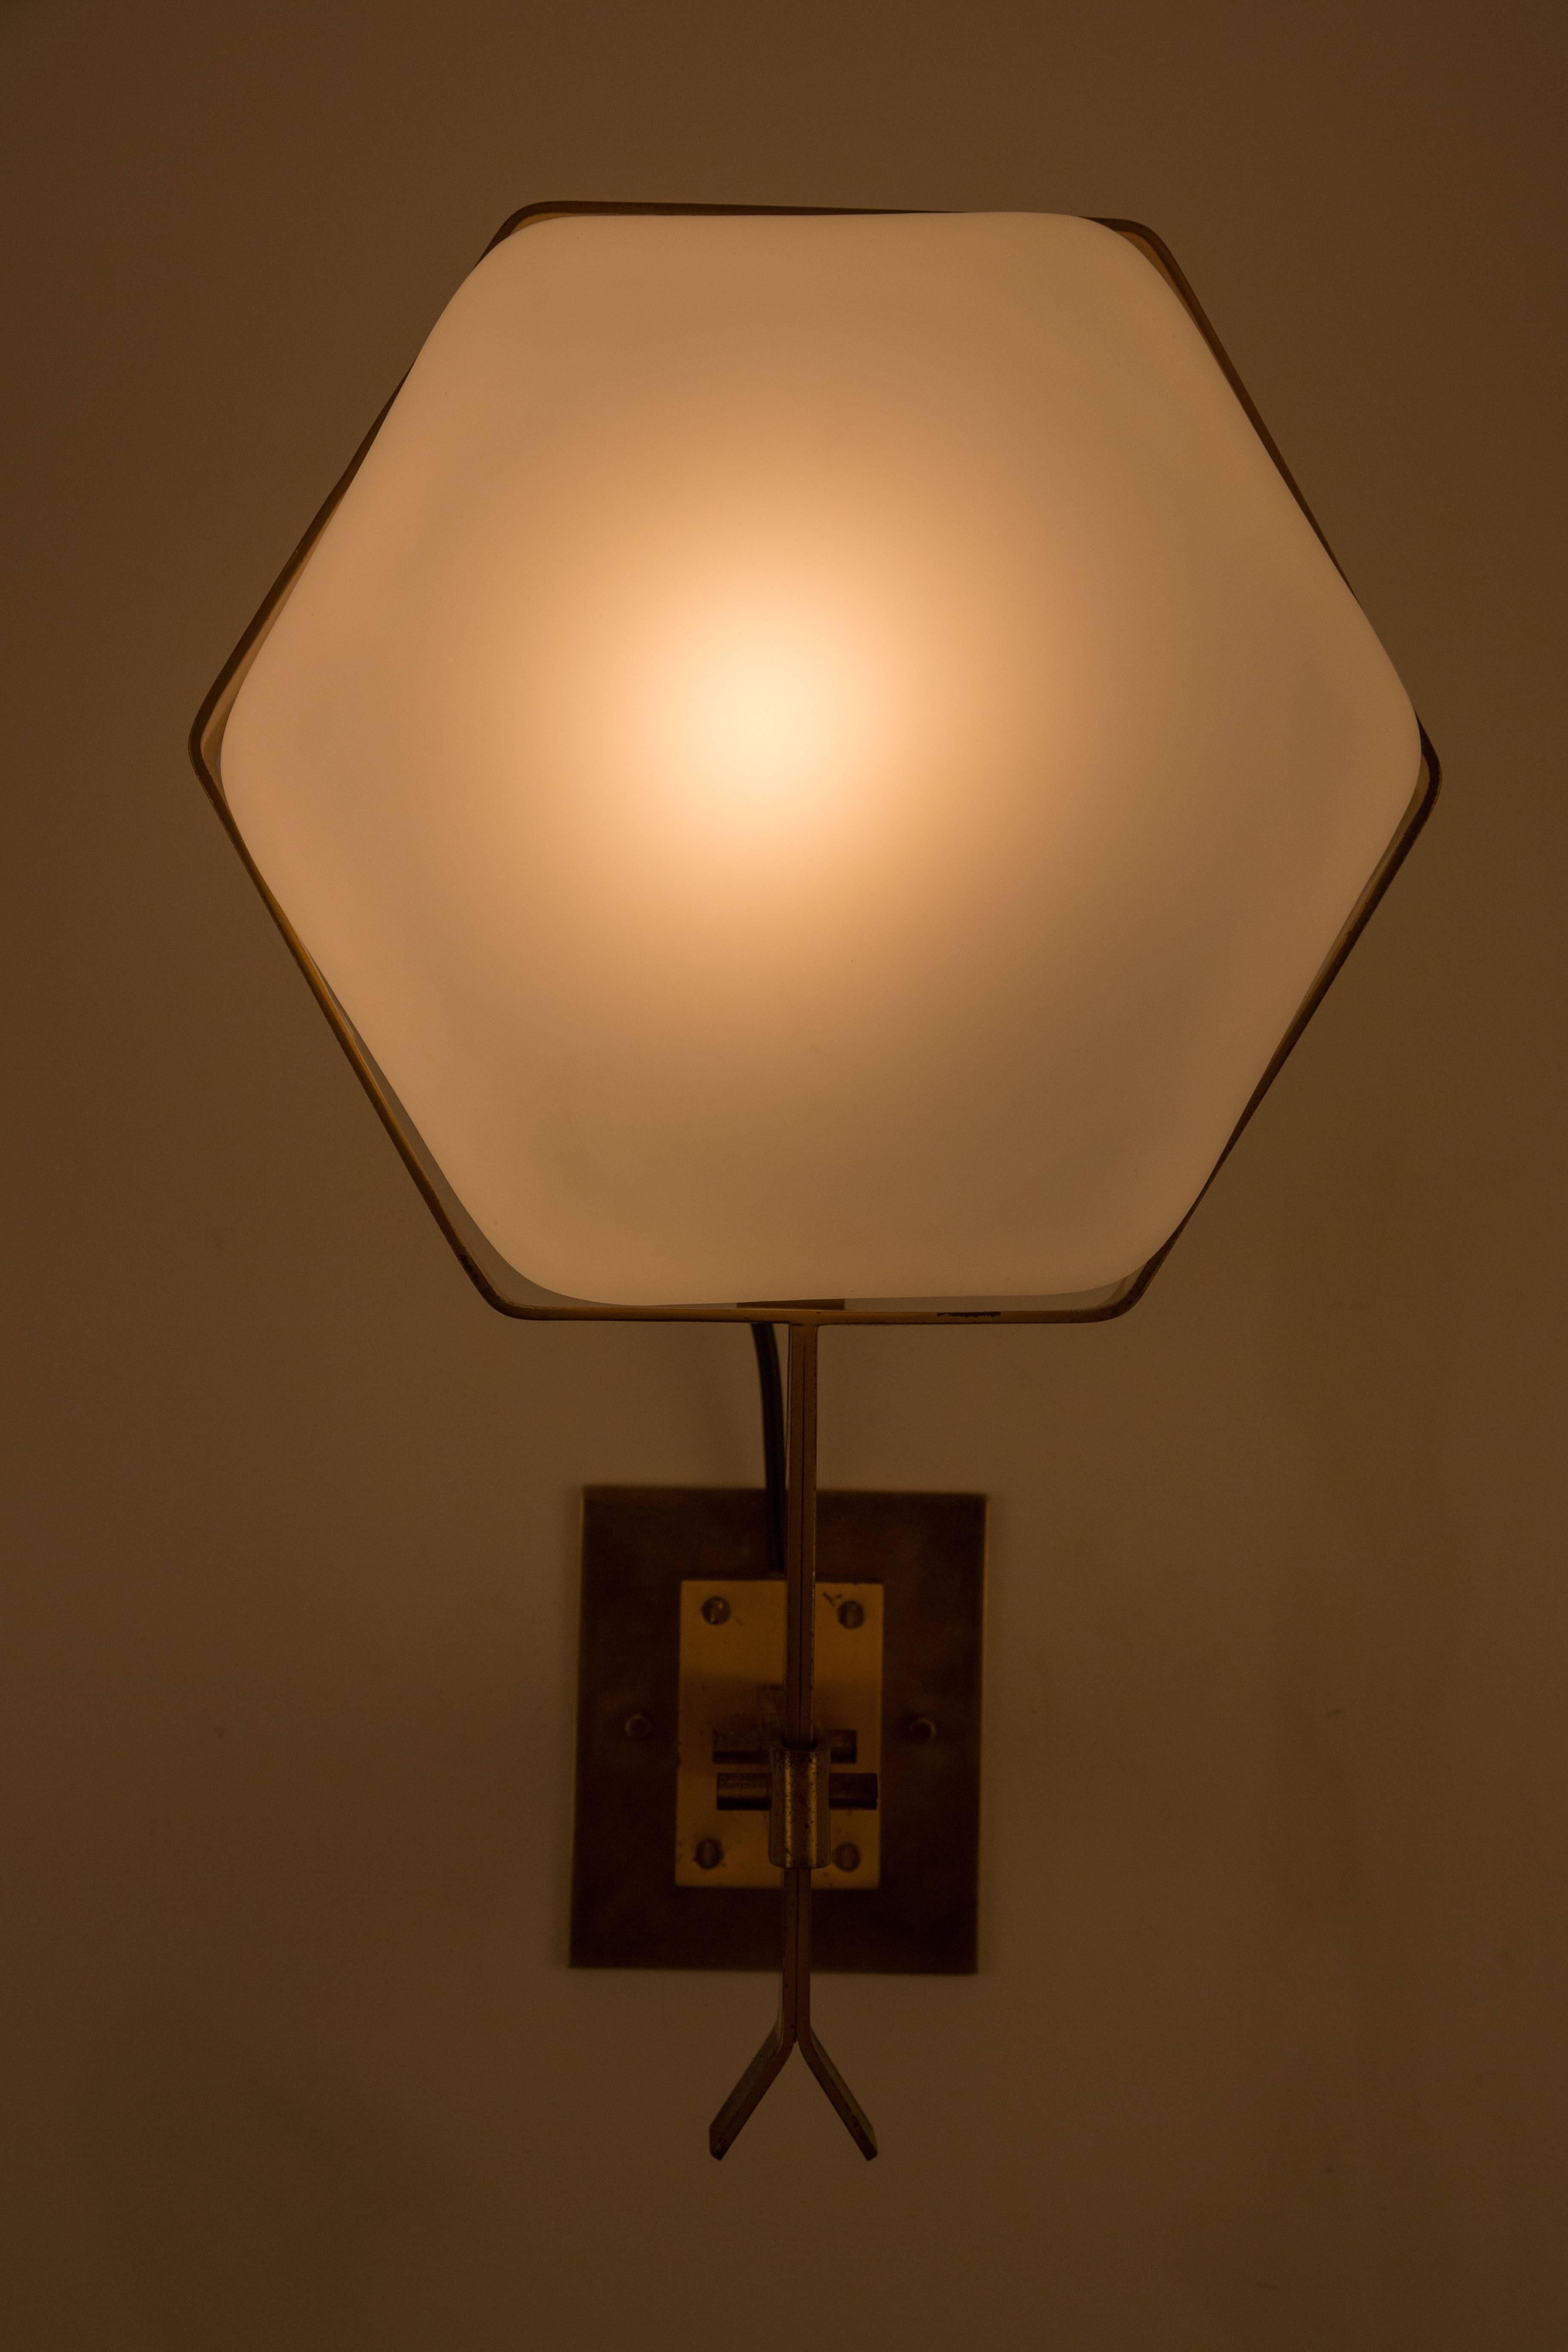 Four brass and satin glass hexagon shaped sconces by Stilnovo. Produced in Italy in the 1950s. Sold in pairs only at $7500 per pair. Each sconces has a brass mechanism in the back that unlocks the glass to change the bulb. E27 75w maximum bulbs.